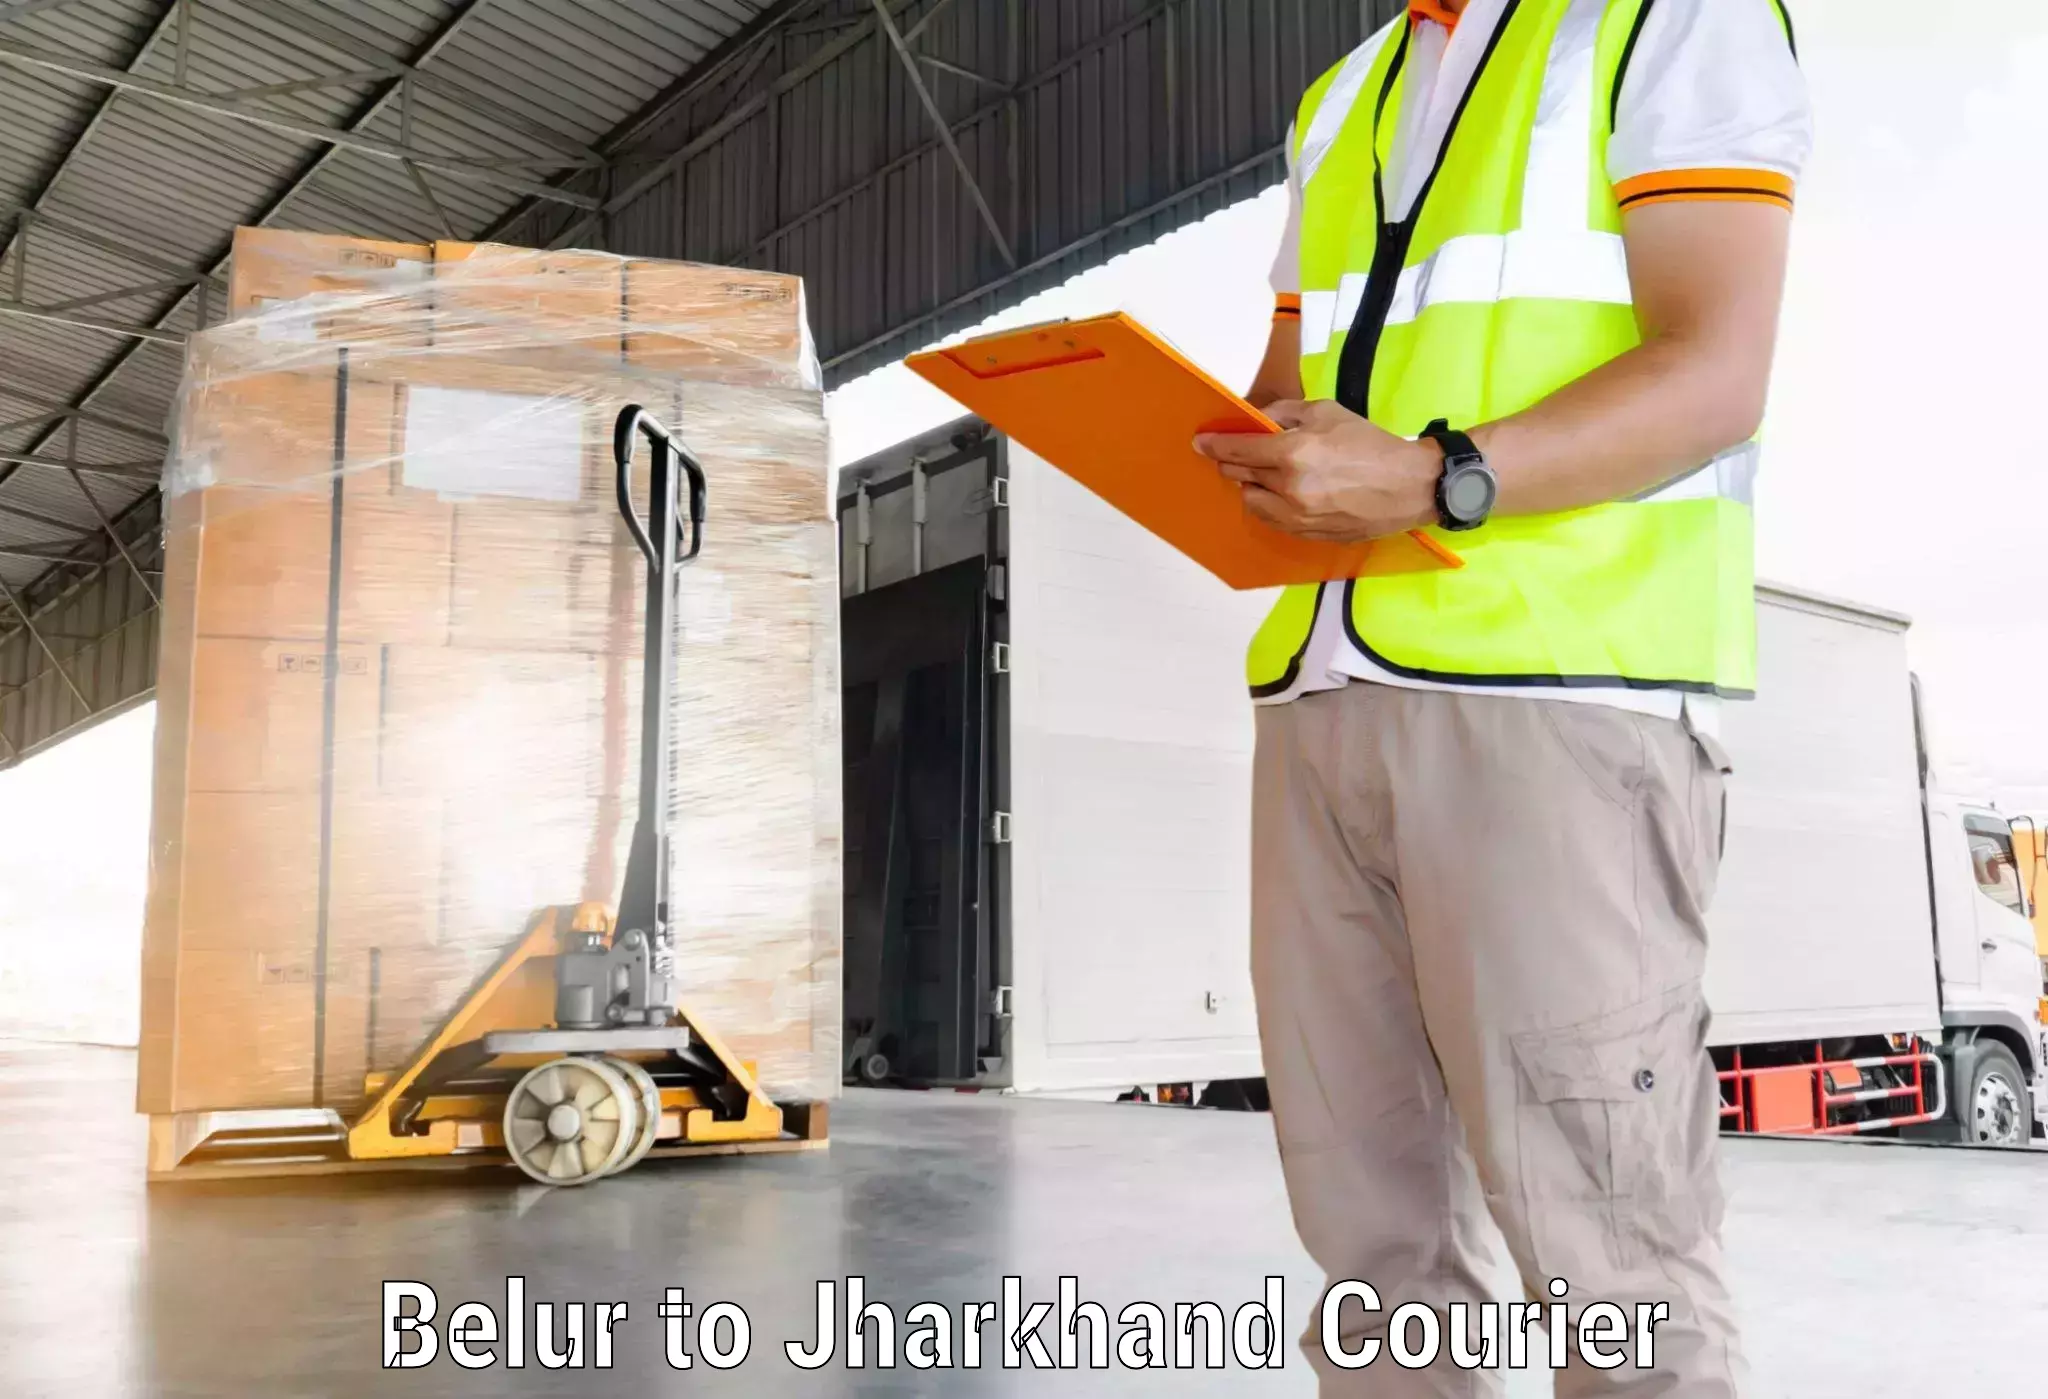 Nationwide courier service Belur to Peterbar